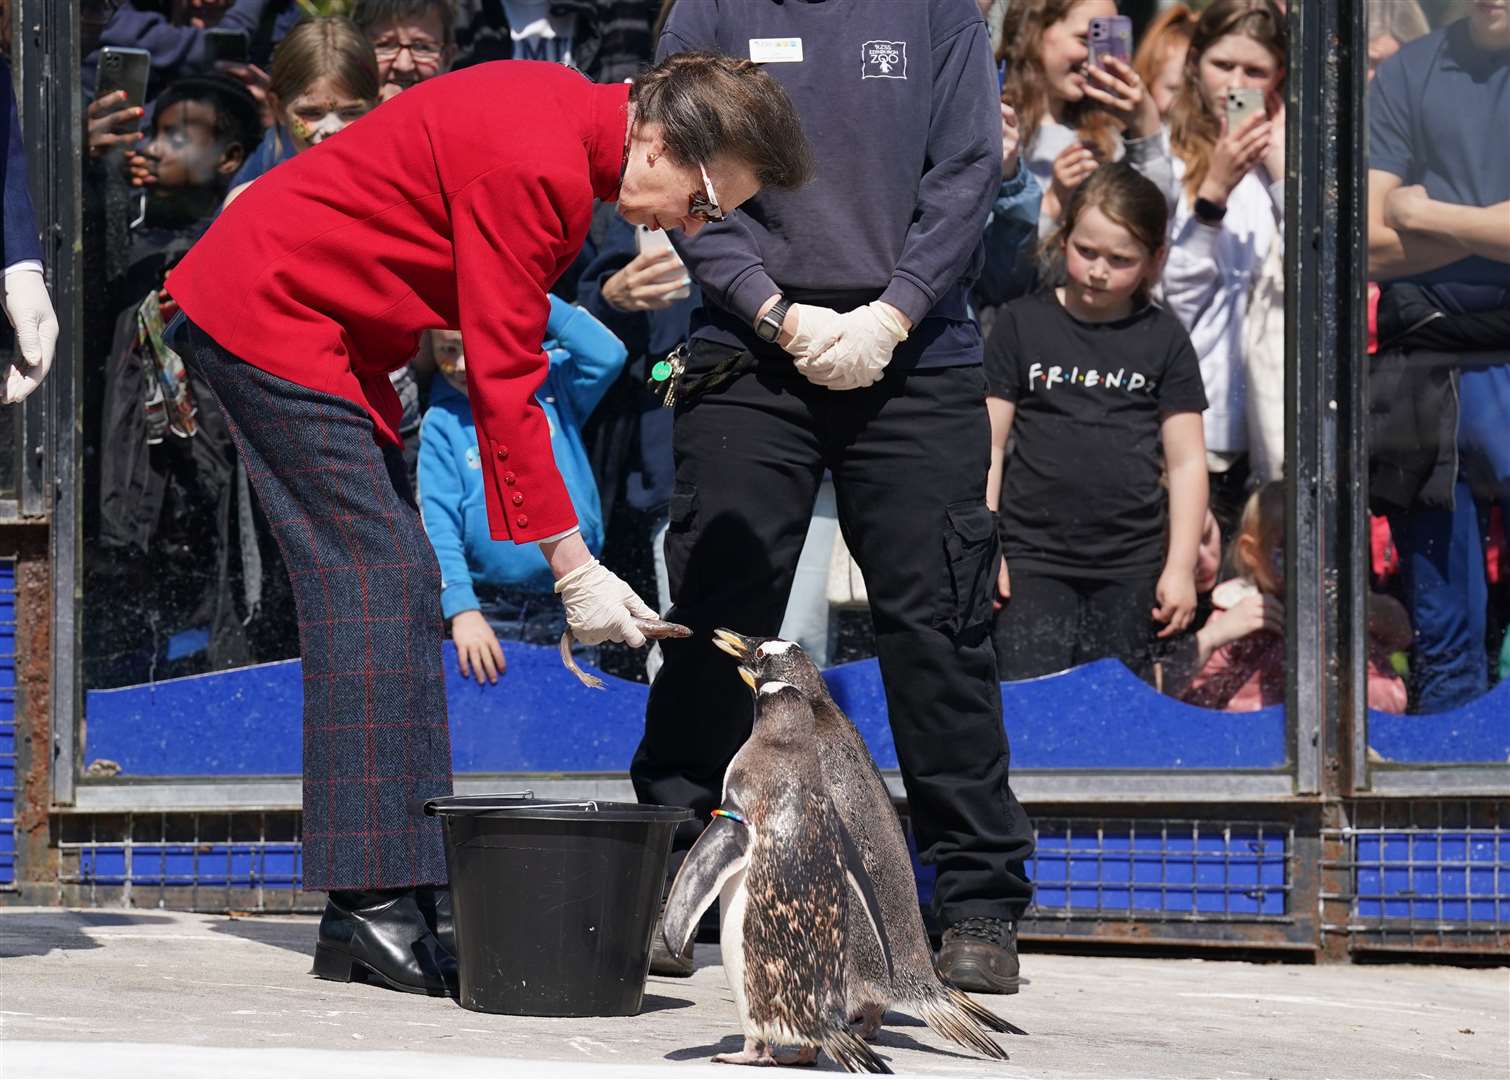 Later, the Princess Royal travelled to Scotland where she marked her mother’s milestone by feeding penguins and meeting young Ukrainian refugees on a visit to Edinburgh Zoo (Andrew Milligan/PA)